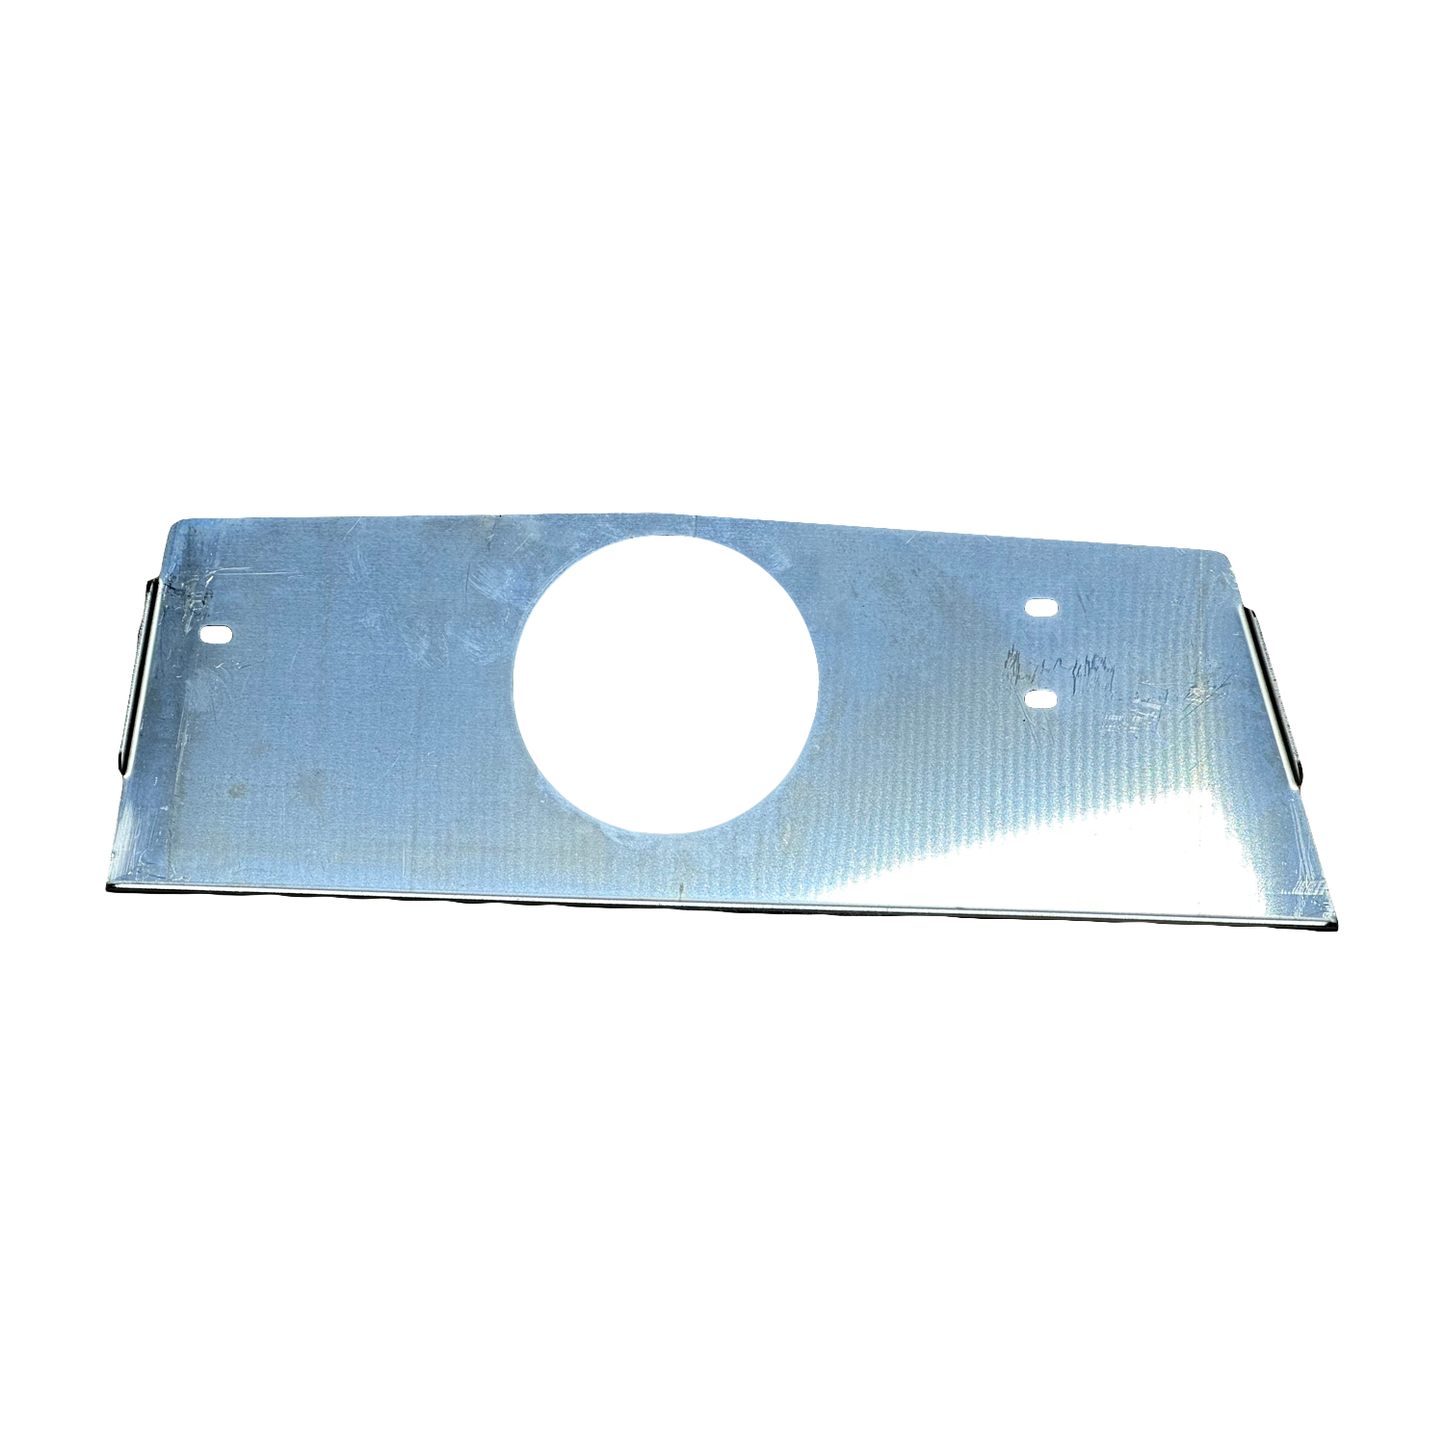 Passenger Side Stainless Steel Panel For Chain Guard